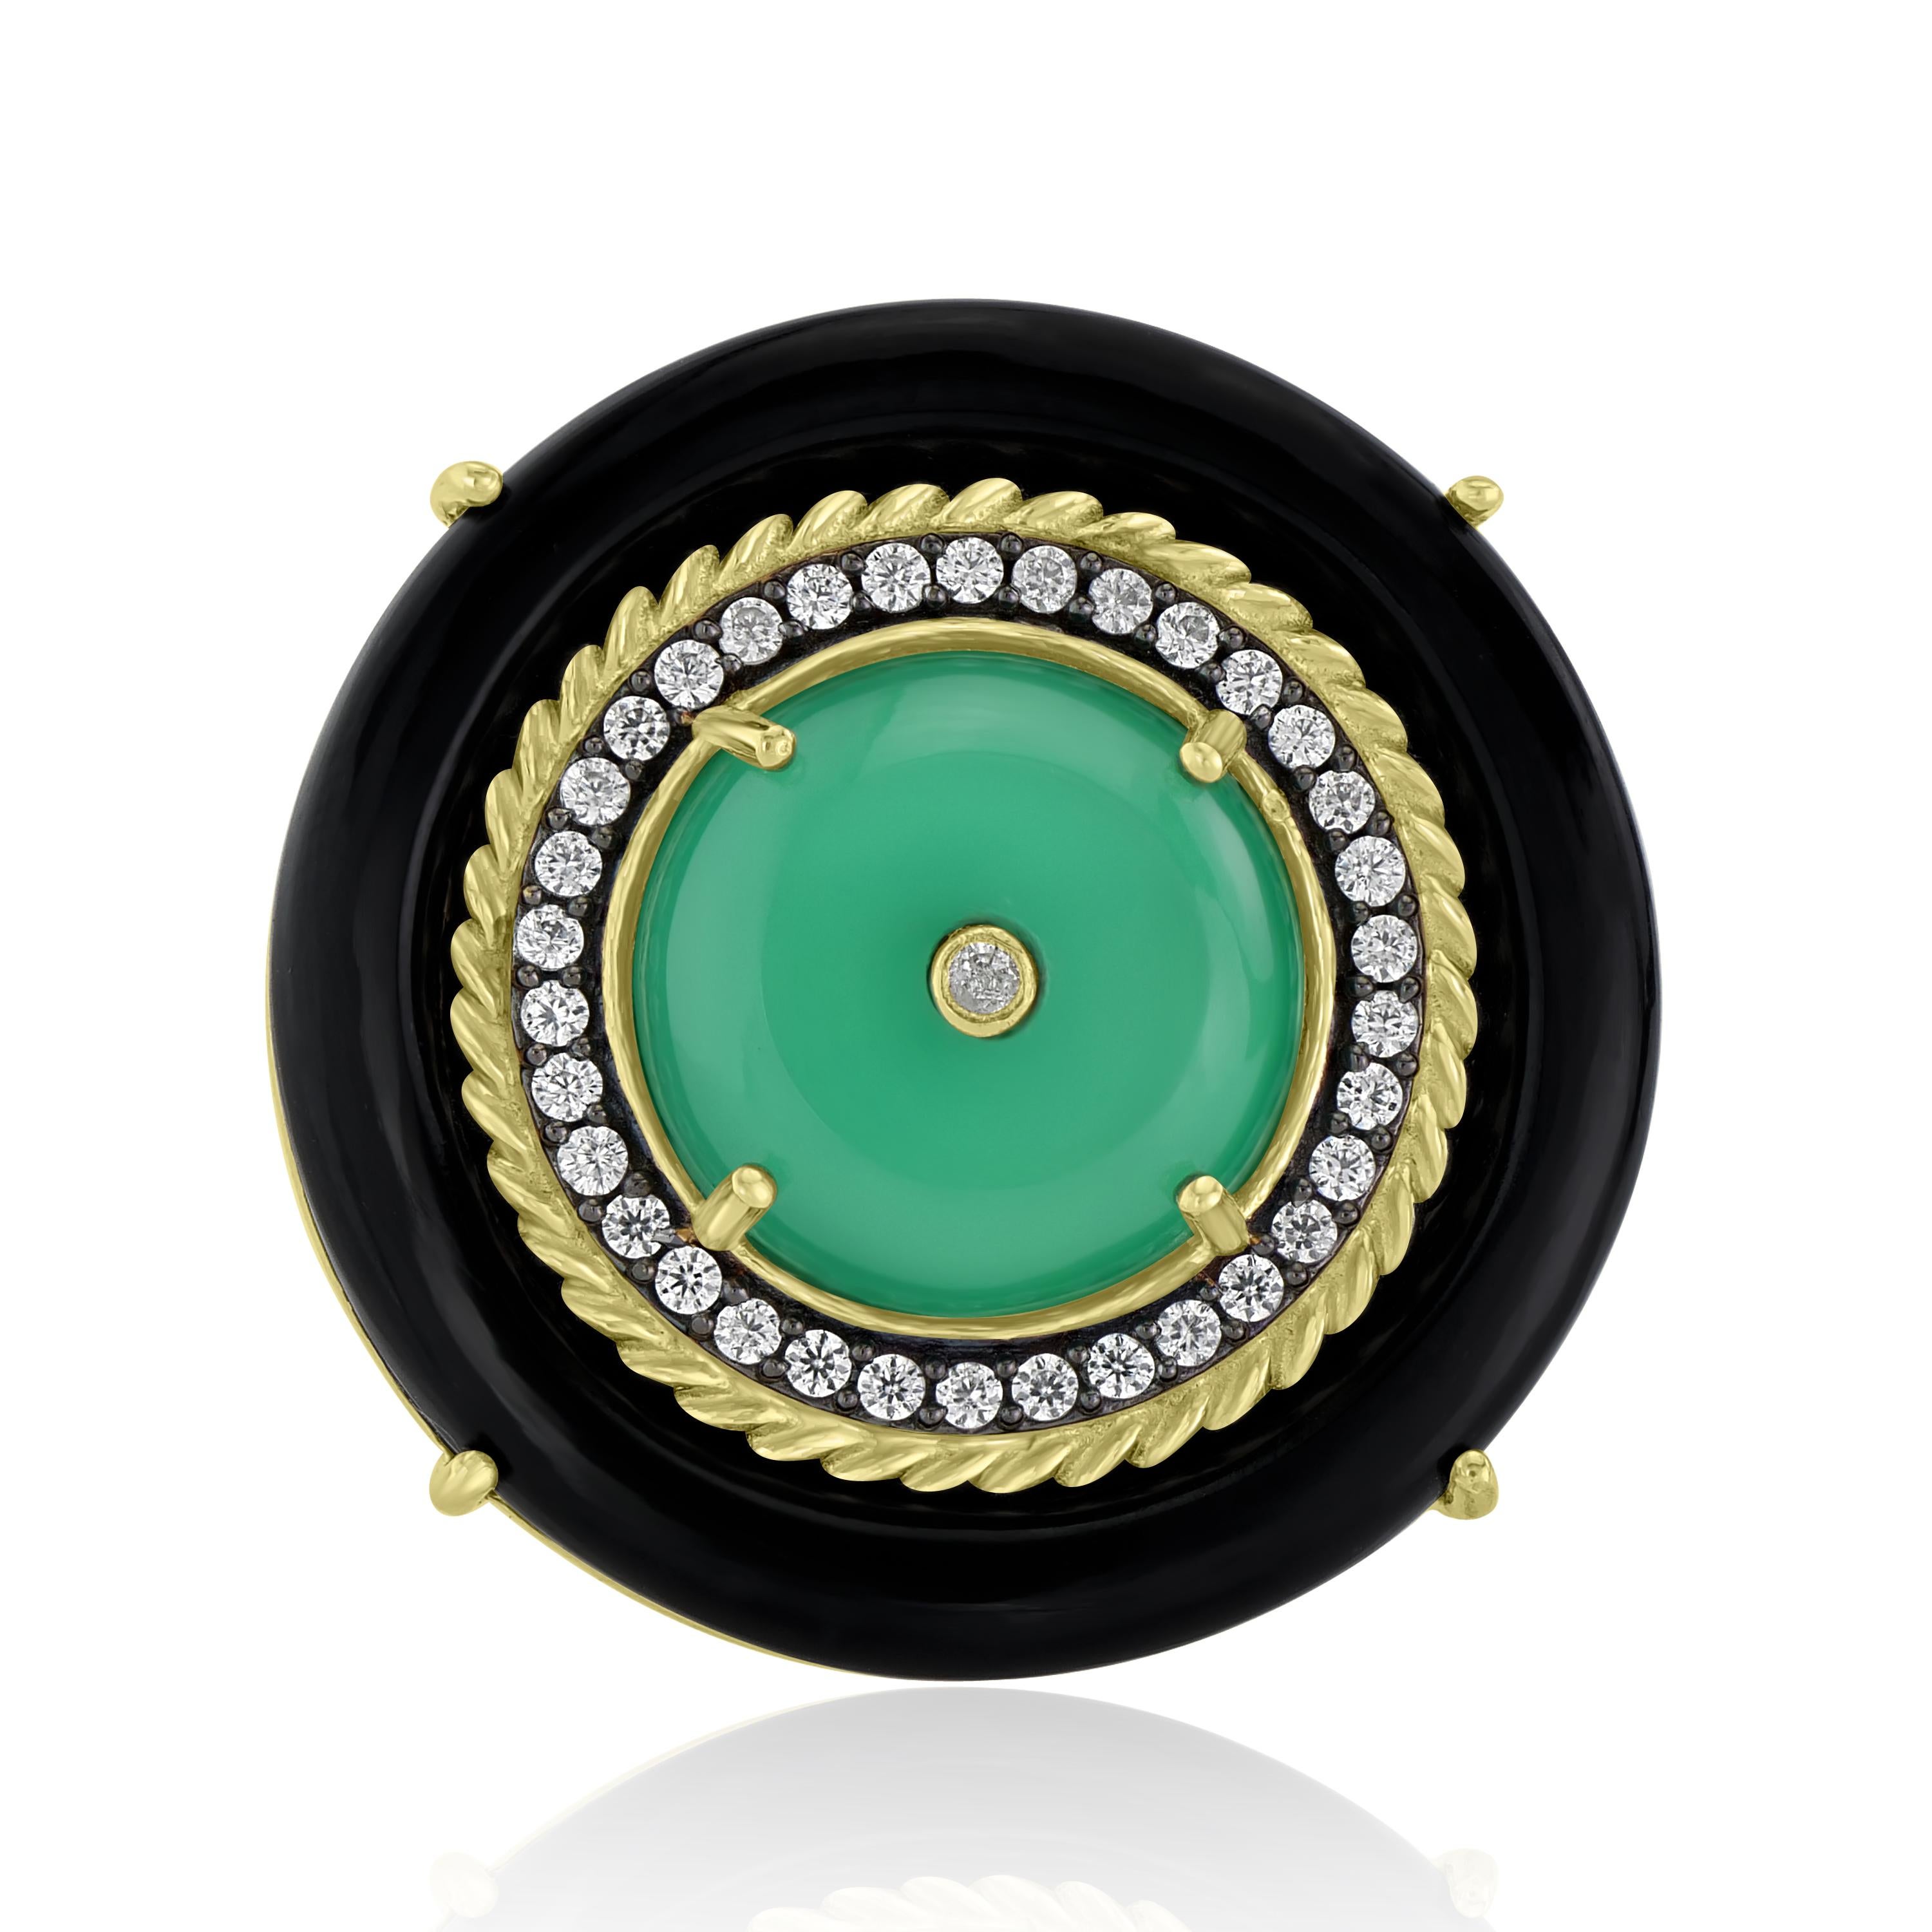 Modern 14 Karat Gold-Plated Sterling Silver Onyx and Zircon Center Design Cocktail Ring